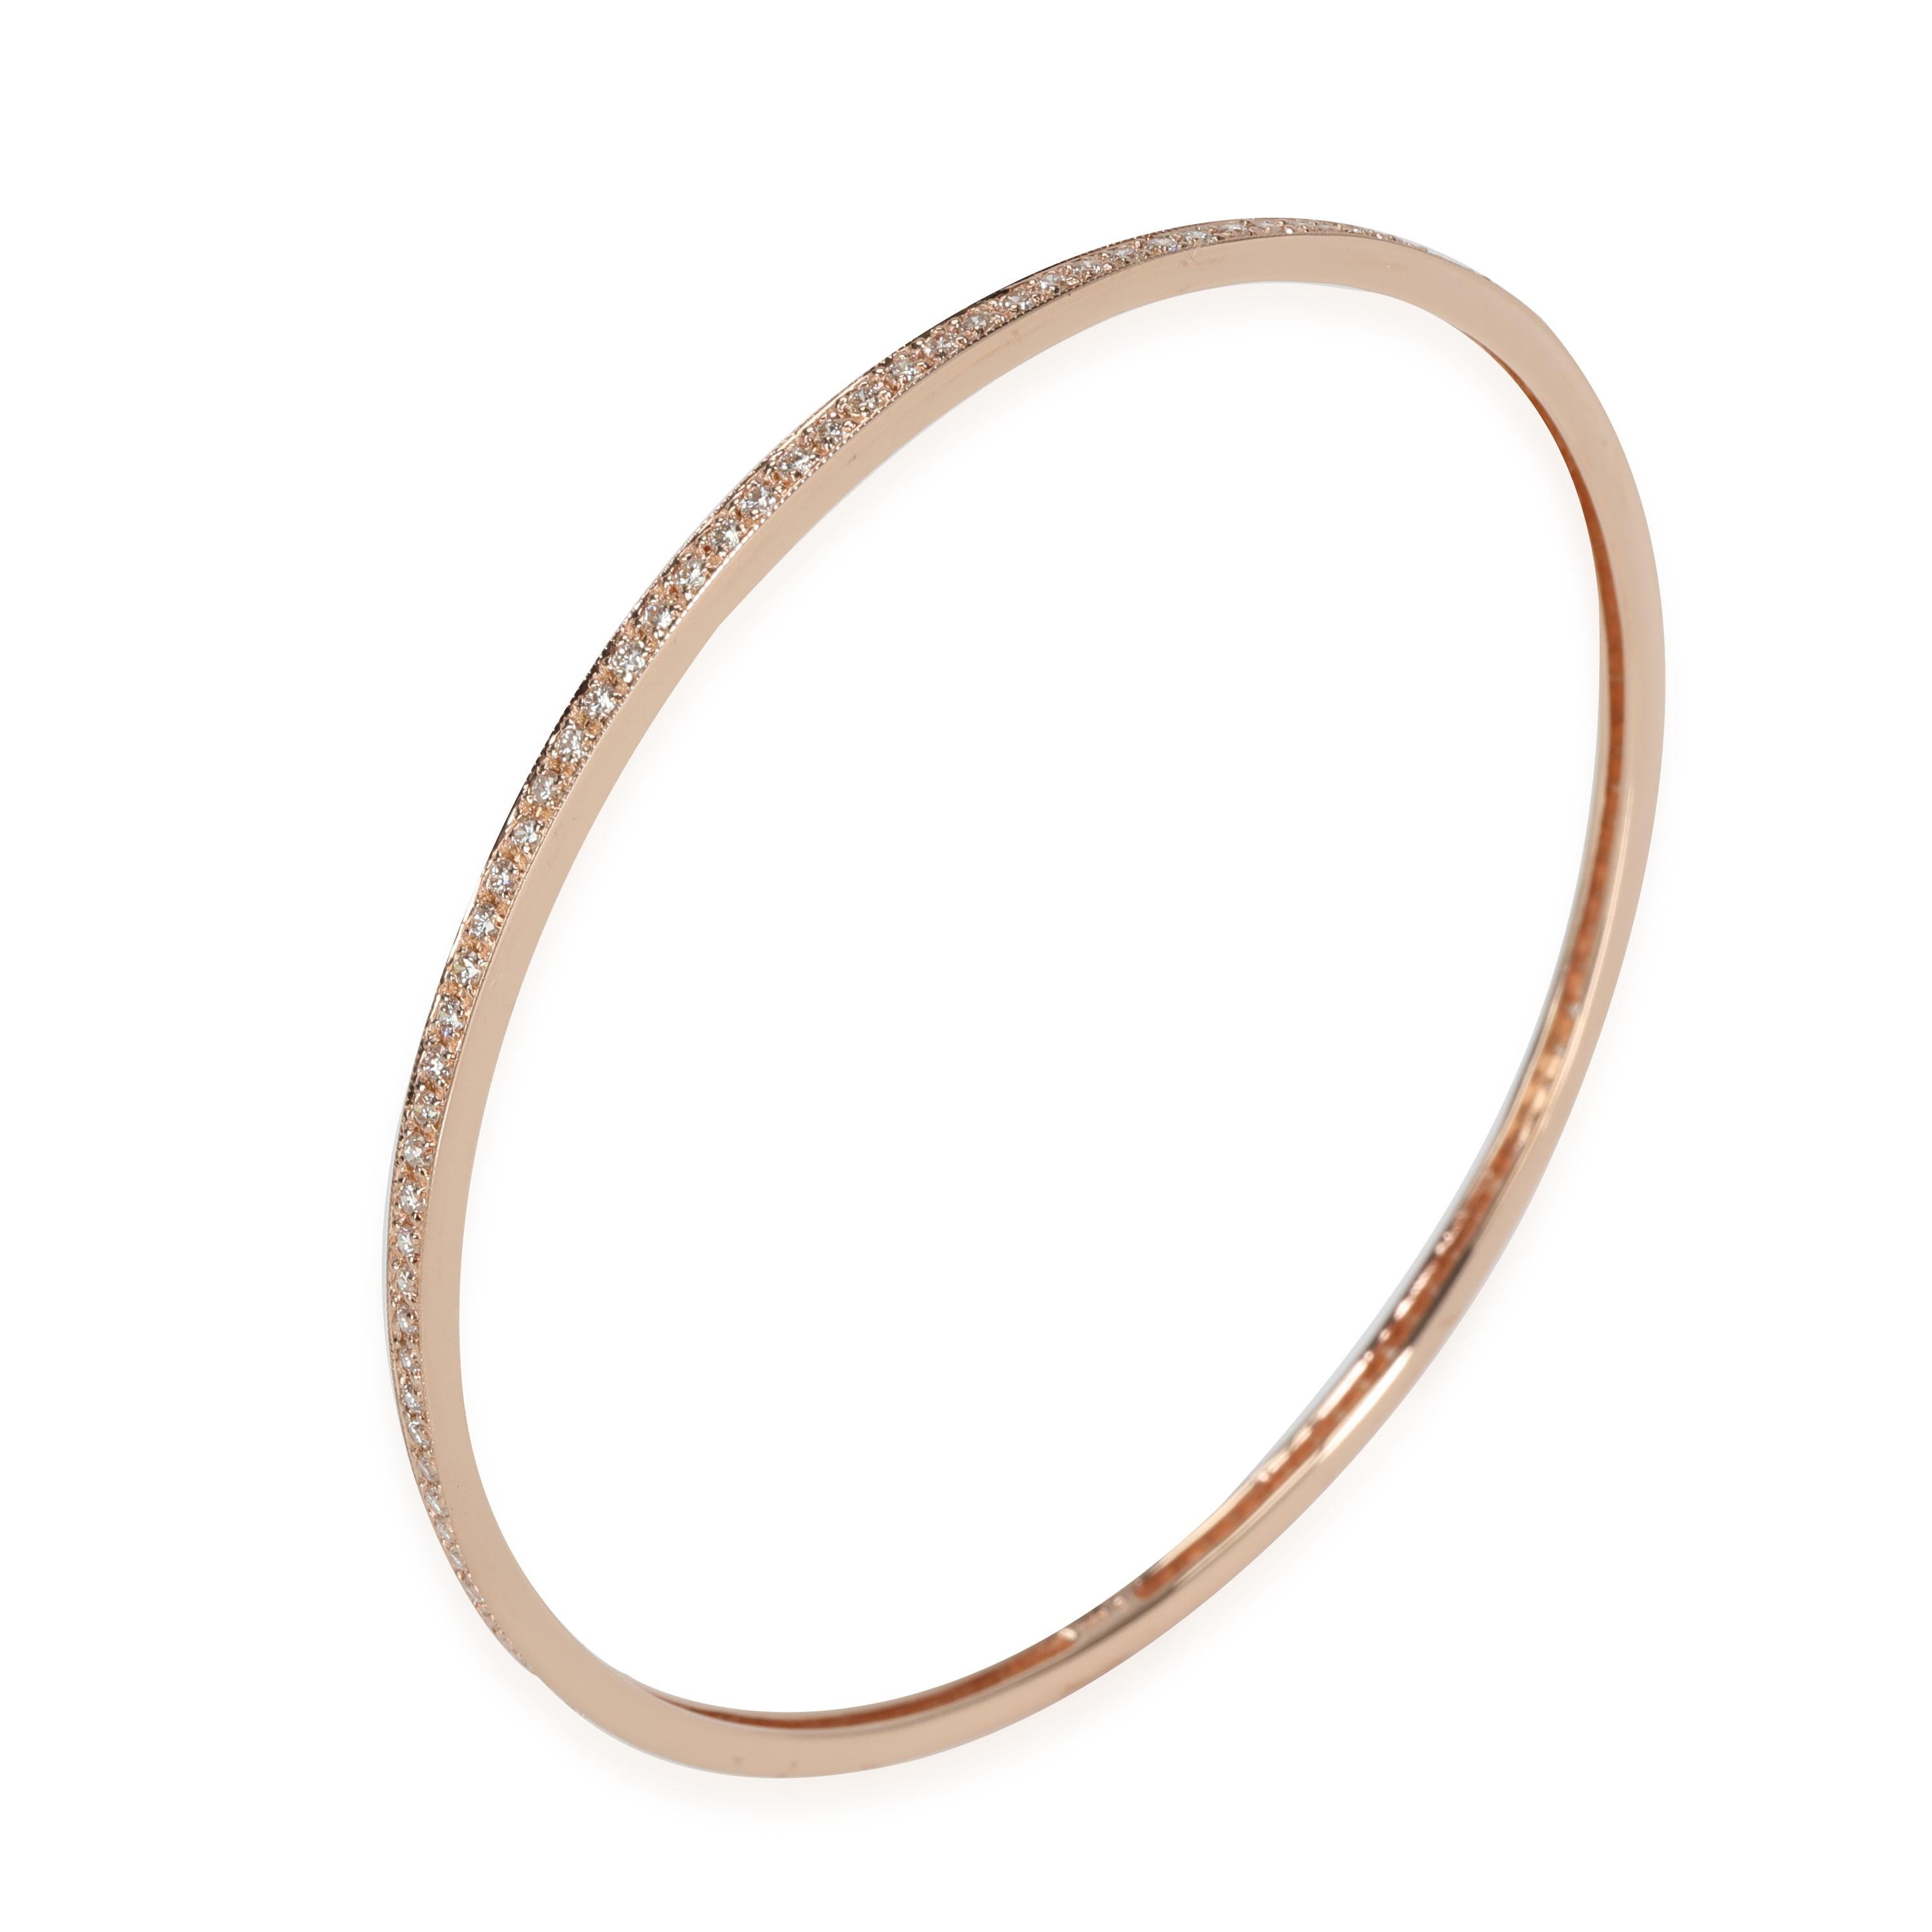 Diamond Bangle in 18k Rose Gold 1.75 CTW

PRIMARY DETAILS
SKU: 117289
Listing Title: Diamond Bangle in 18k Rose Gold 1.75 CTW
Condition Description: Retails for 2995 USD. In excellent condition and recently polished. Chain is 7.5 inches in